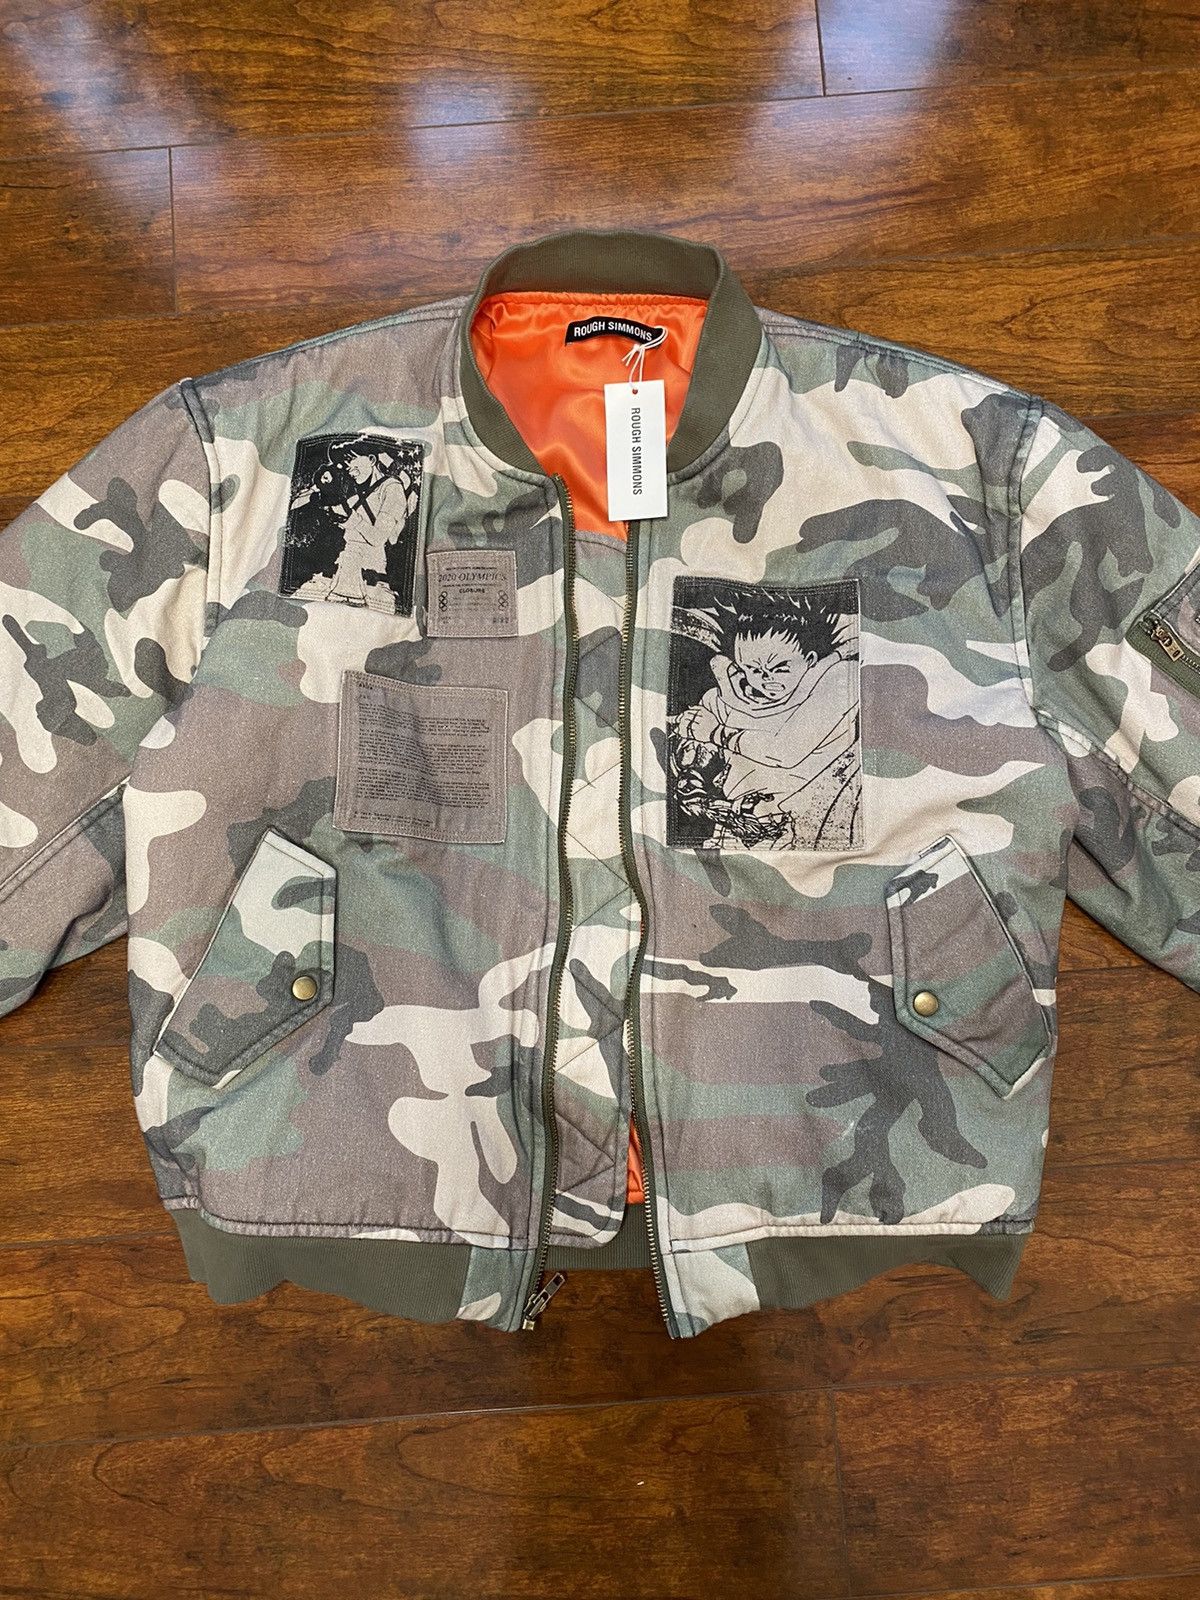 Rough Simmons Neo-Tokyo Bomber Jacket | Grailed